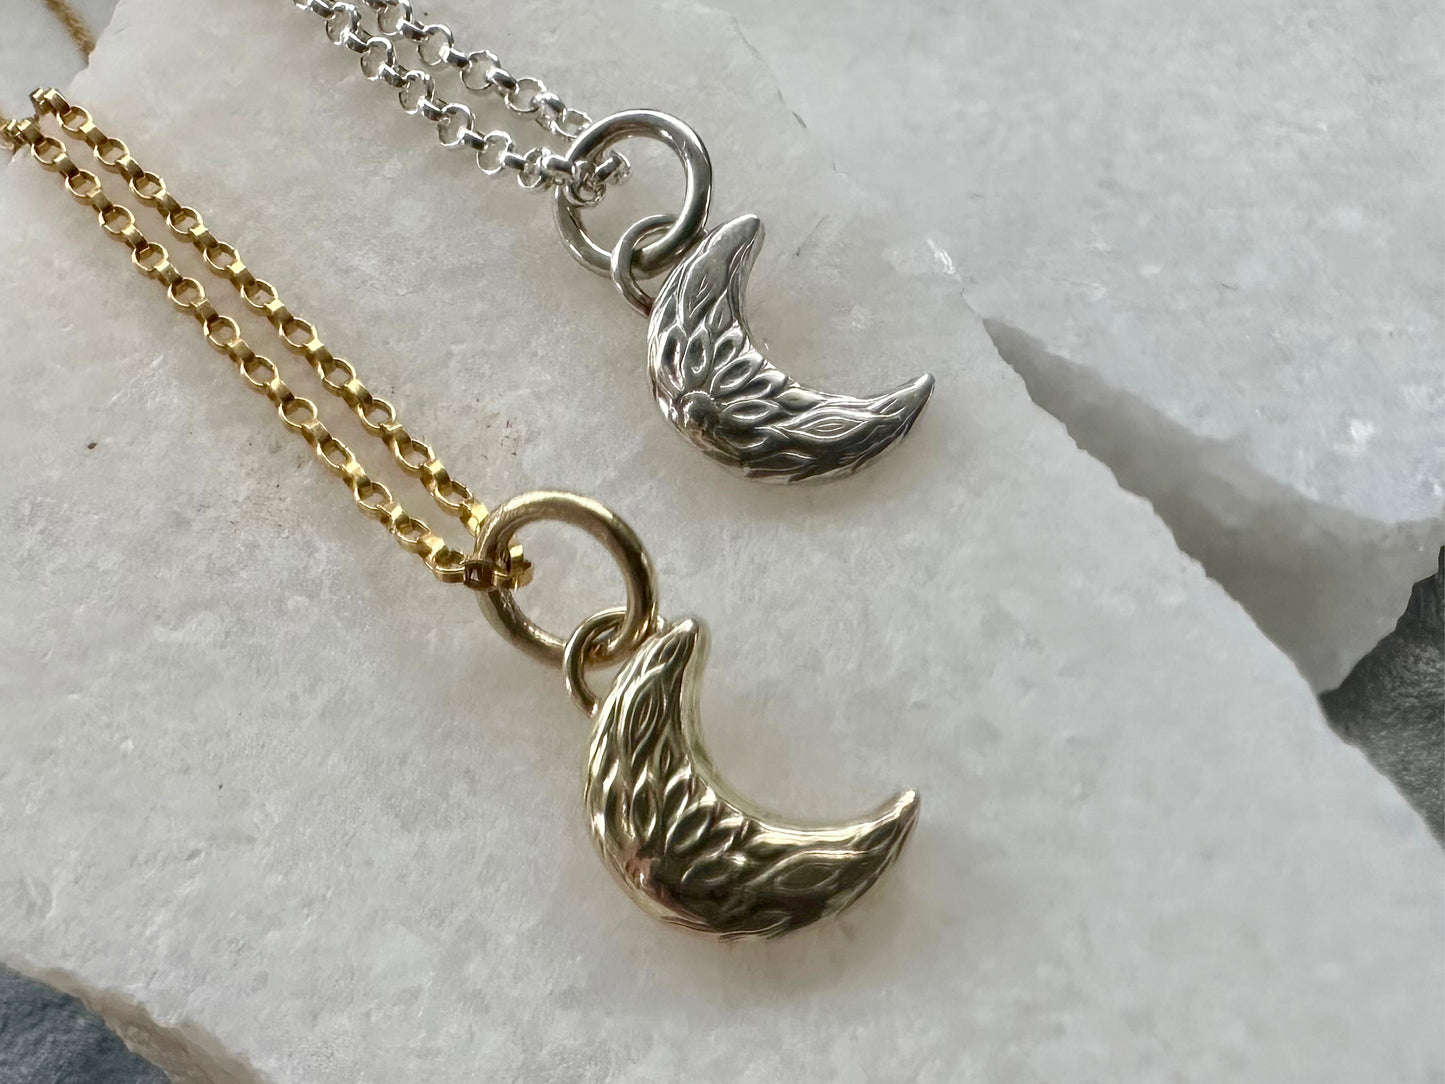 Solid 9ct gold Crescent Moon Charm